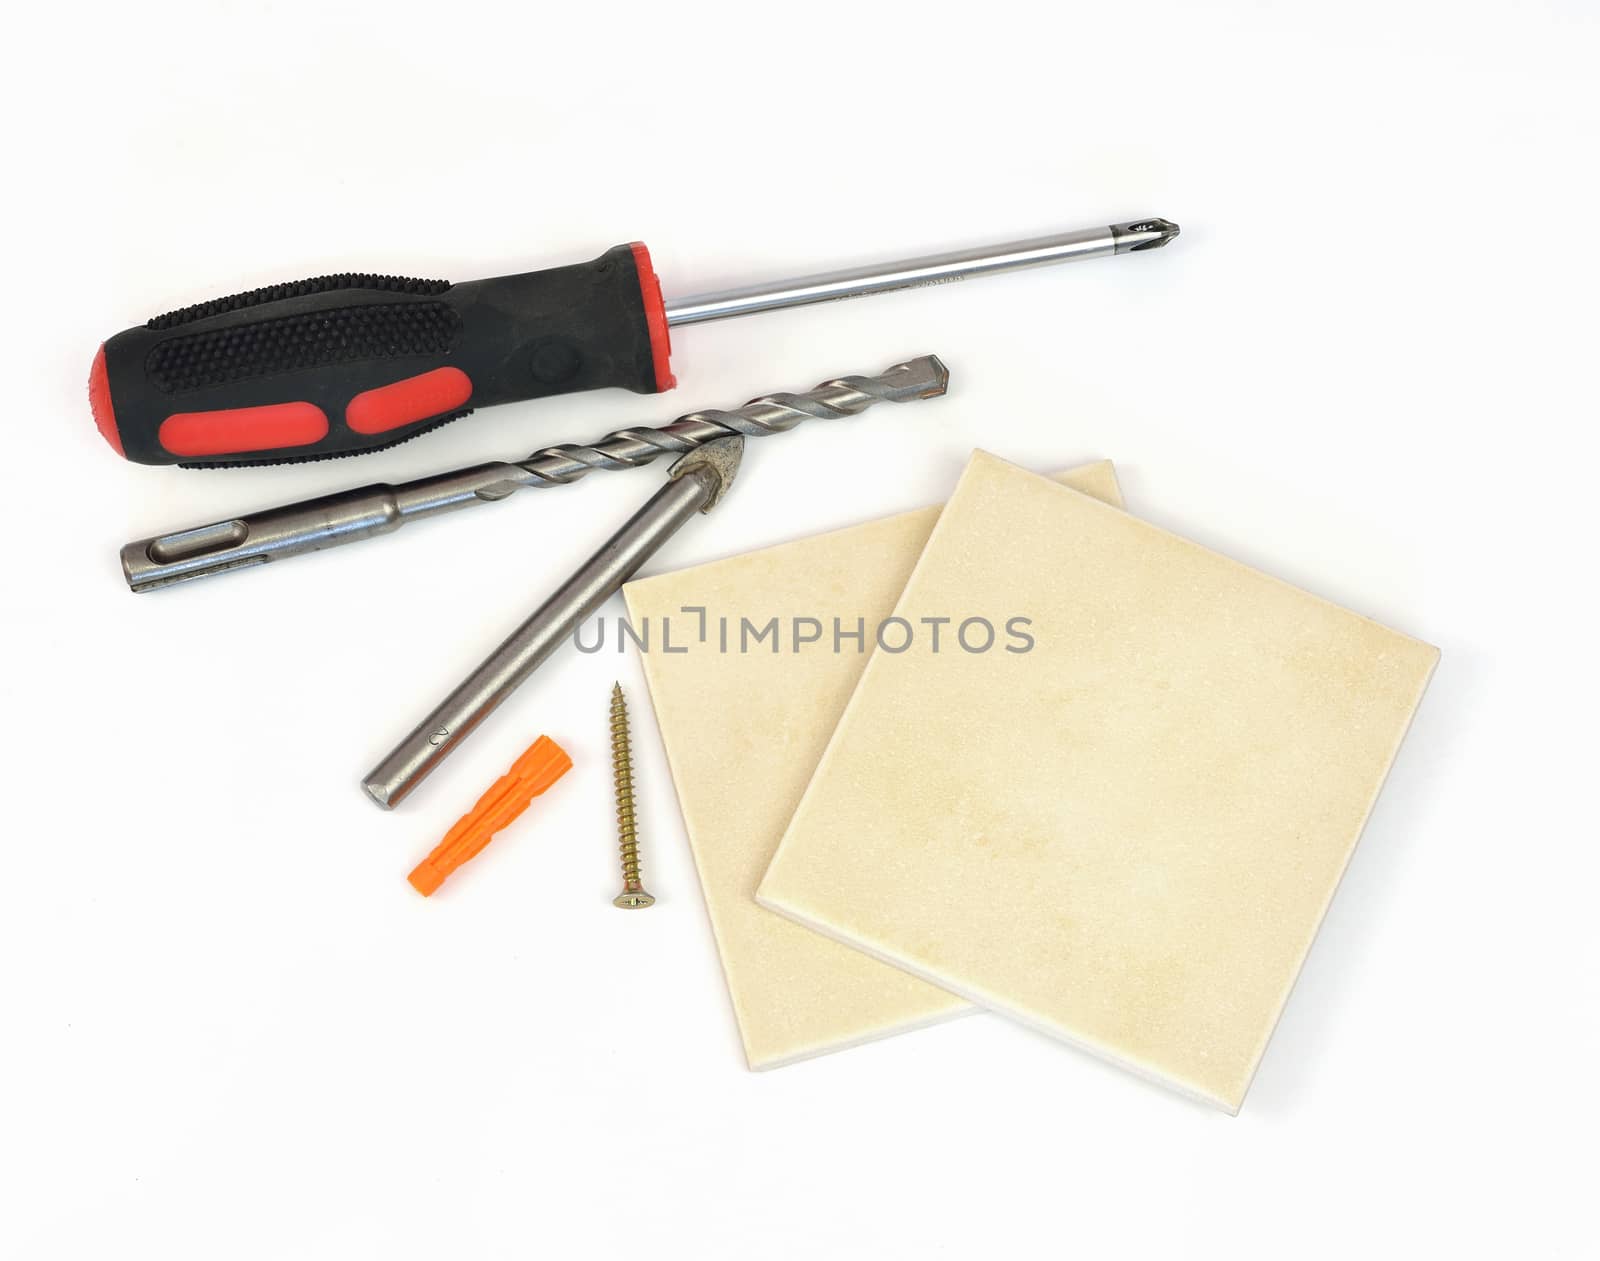 Screwdriver, drill and ceramic tiles. Isolated on white background